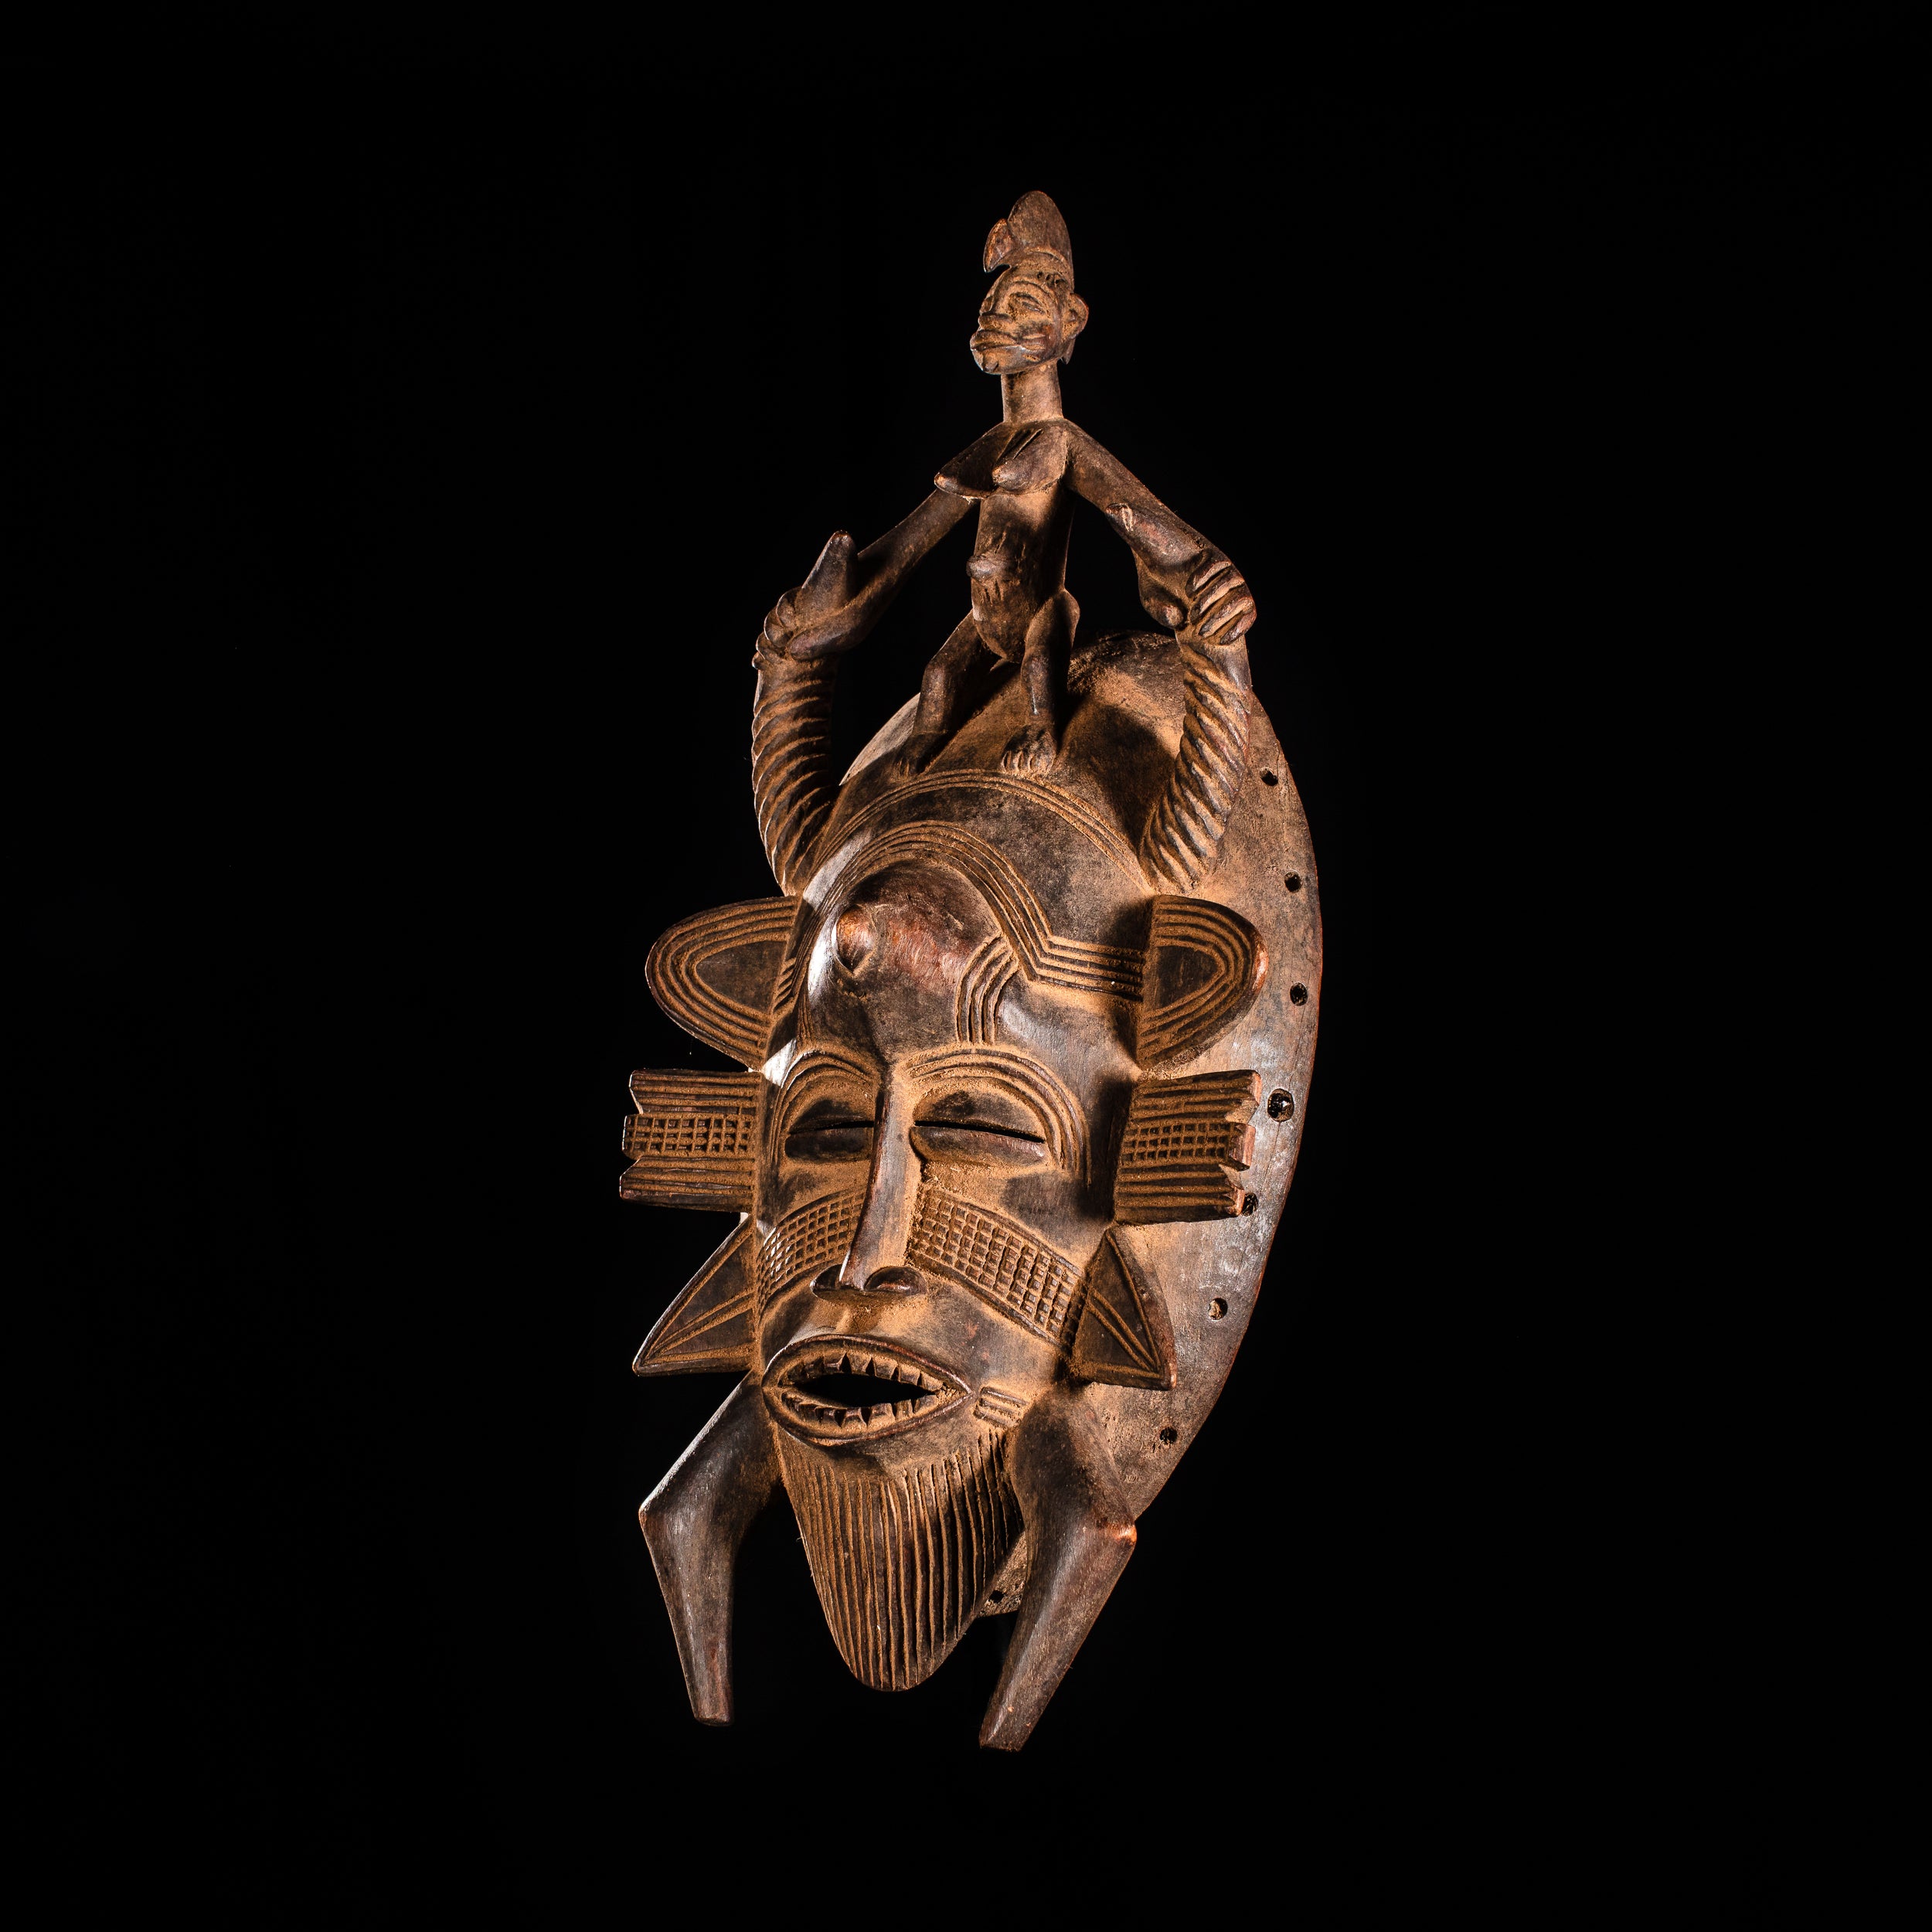 Tribal Masks - Handcrafted - Senufo Masks - Traditional Folk Art - African Artifacts Sculptures - African Art Collector - This Senufo tribal face mask from Kpelie is crafted from wood, with finely painted detail and raised accents. It makes an excellent addition to any home or art collection, offering a unique visual aesthetic and cultural representation. Heigh 14